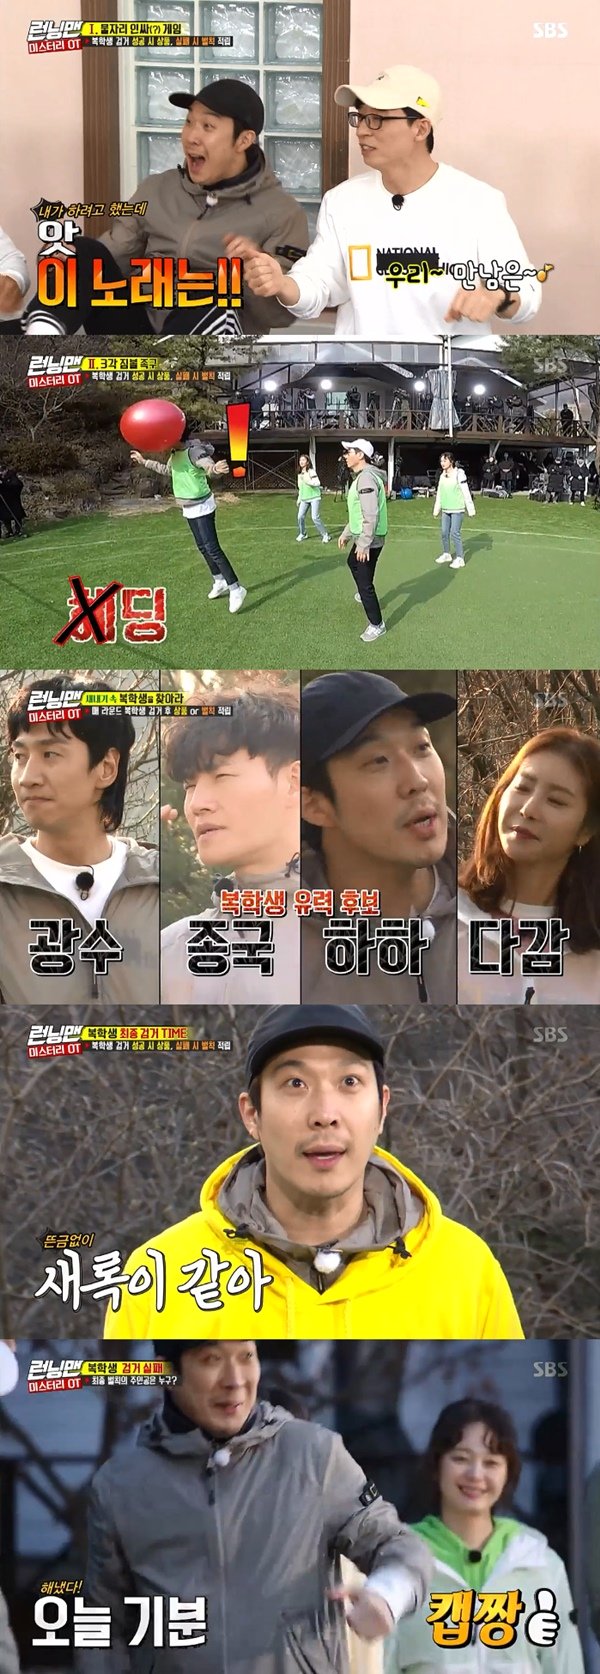 On the 10th, SBS Running Man was featured as a spring orientation feature. Singer Hong Jin-young and actor Kim Sang-rok appeared as guests.Of the 11 people who attended the orientation, they had to find a returning student who pretended to be a freshman.In the K-pop Game, old songs such as Insa appeared and laughed, even though it was Insa Game.Kim Jong-guk pointed out, It was an in-sac Game and it became a family entertainment.The person who drank the least of Kalamancy won the penalty exemption with Yang Se-chan, and the hint that the returning student failed the Hidden Mission in the first round and said I told you a lot of age and rank was revealed.Han Da-gam, Ha Ha, and Ji Suk-jin were nominated for the reinstatement. They received seven votes.The final round reinstatement hint is that he used the old buzzword; Haha was suspected of using capchan.But then, the feeling of the do-geum suddenly began to doubt the fast-forward, and eventually the feeling of the do-geum was cast down and decided to be the final student suspect.The returning student was a lower student.